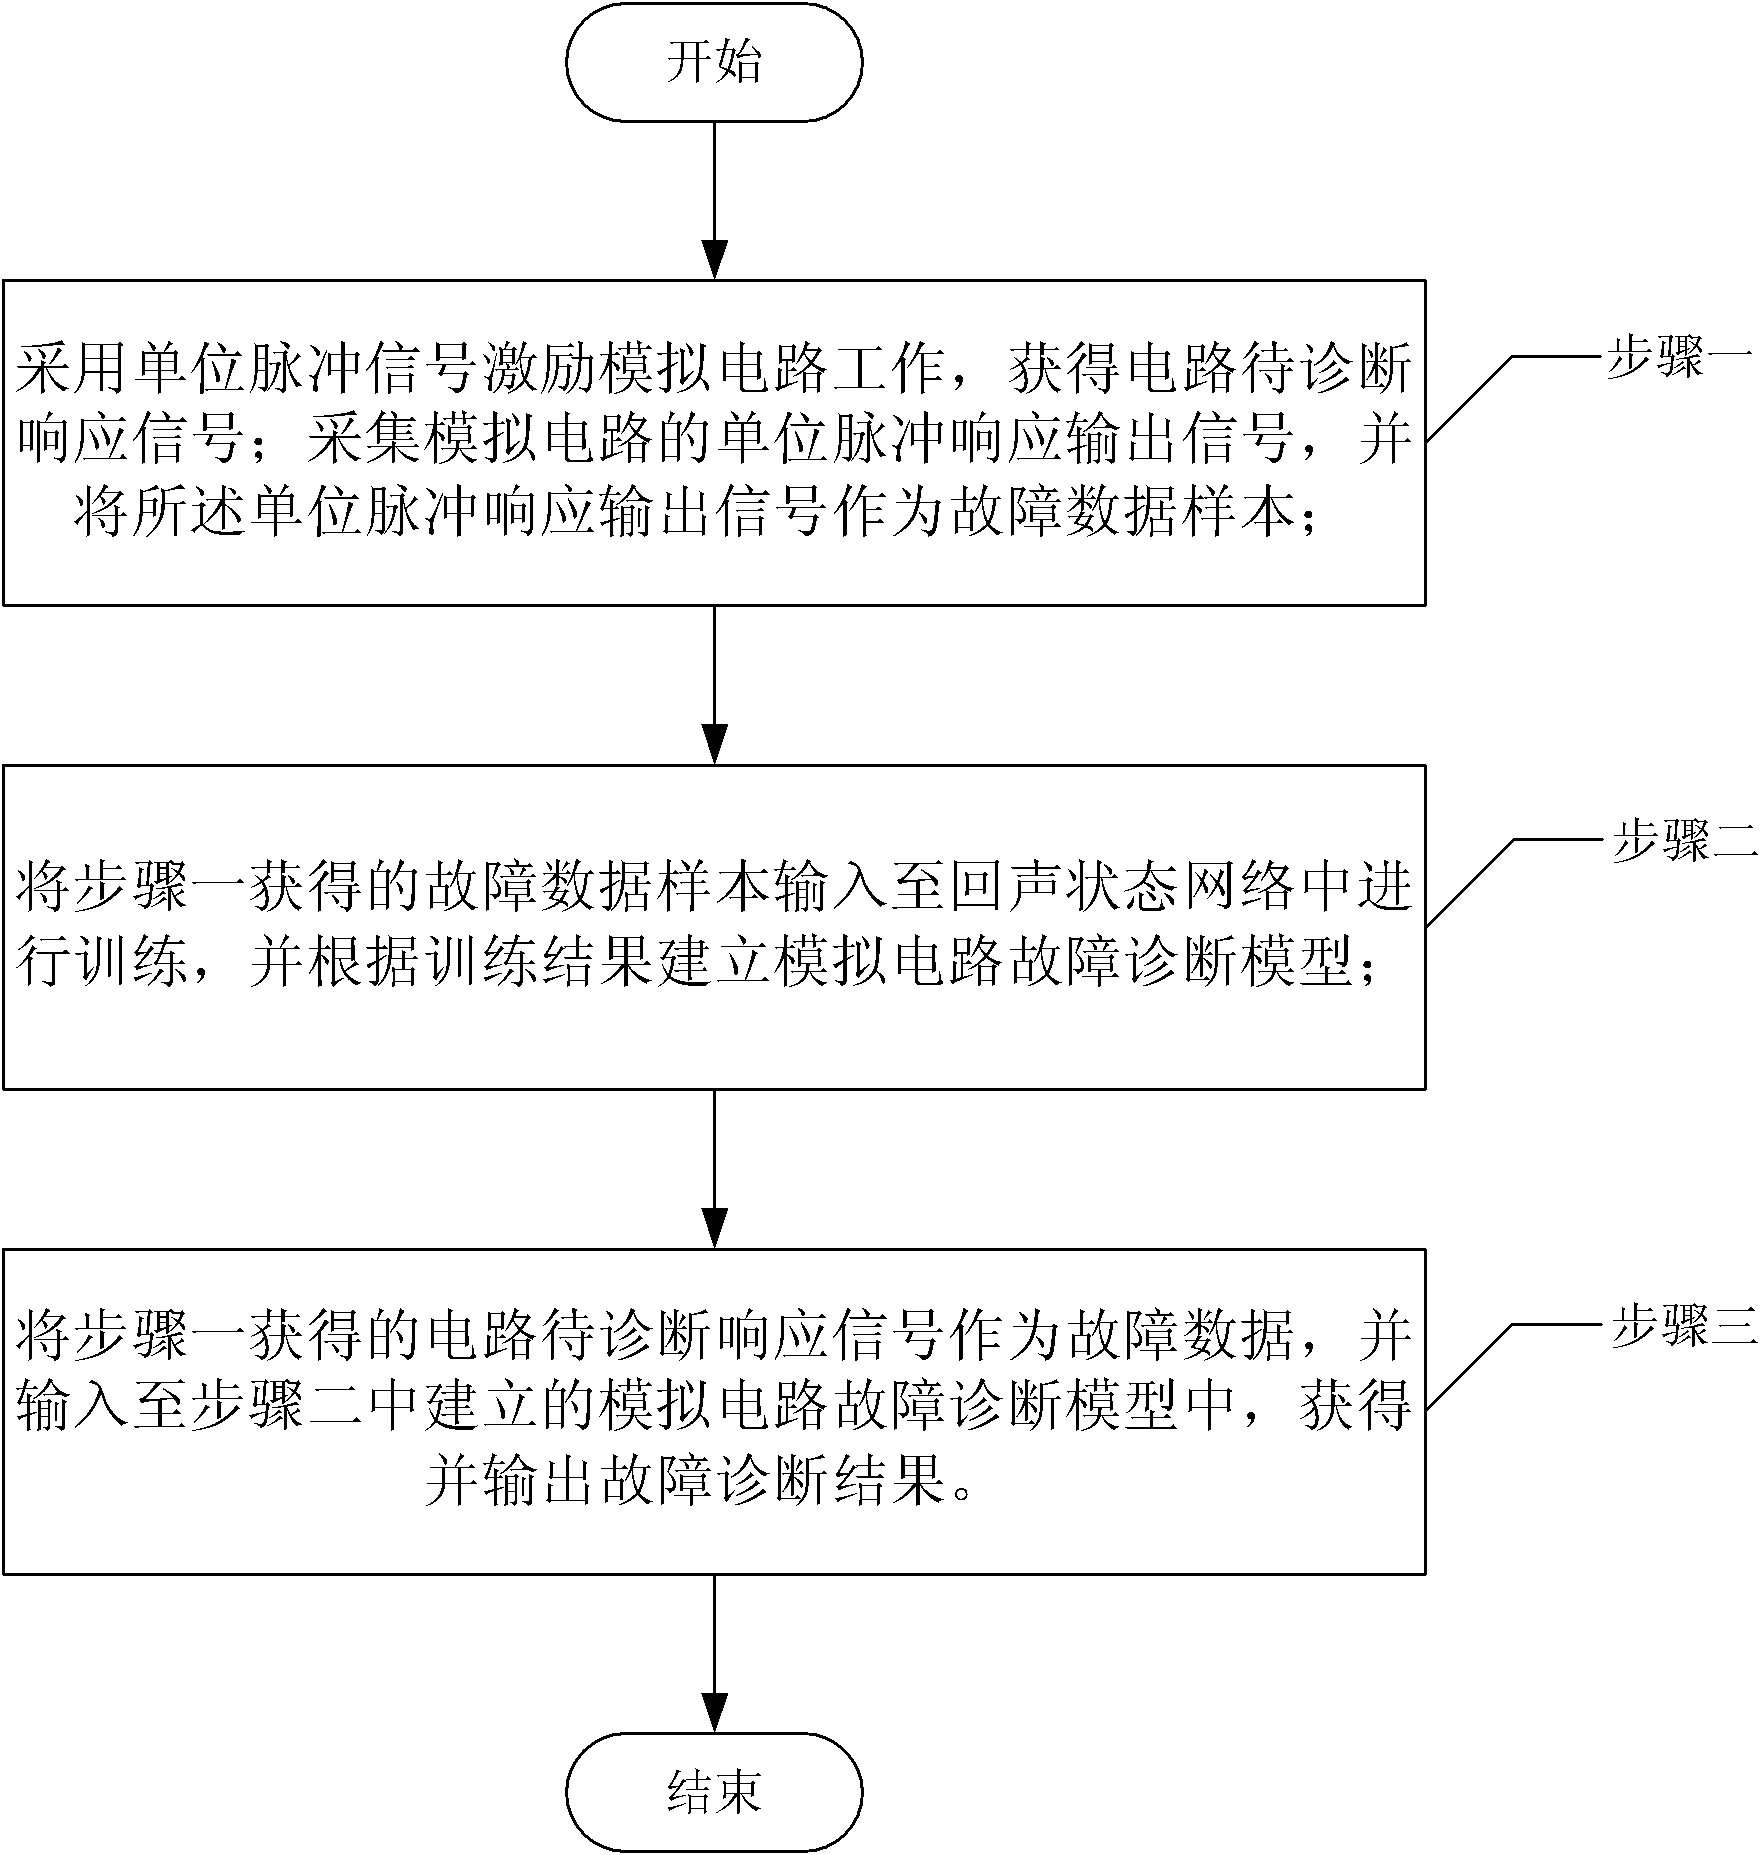 Fault Diagnosis Method for Analog Circuits Based on Echo State Network Dynamic Classification